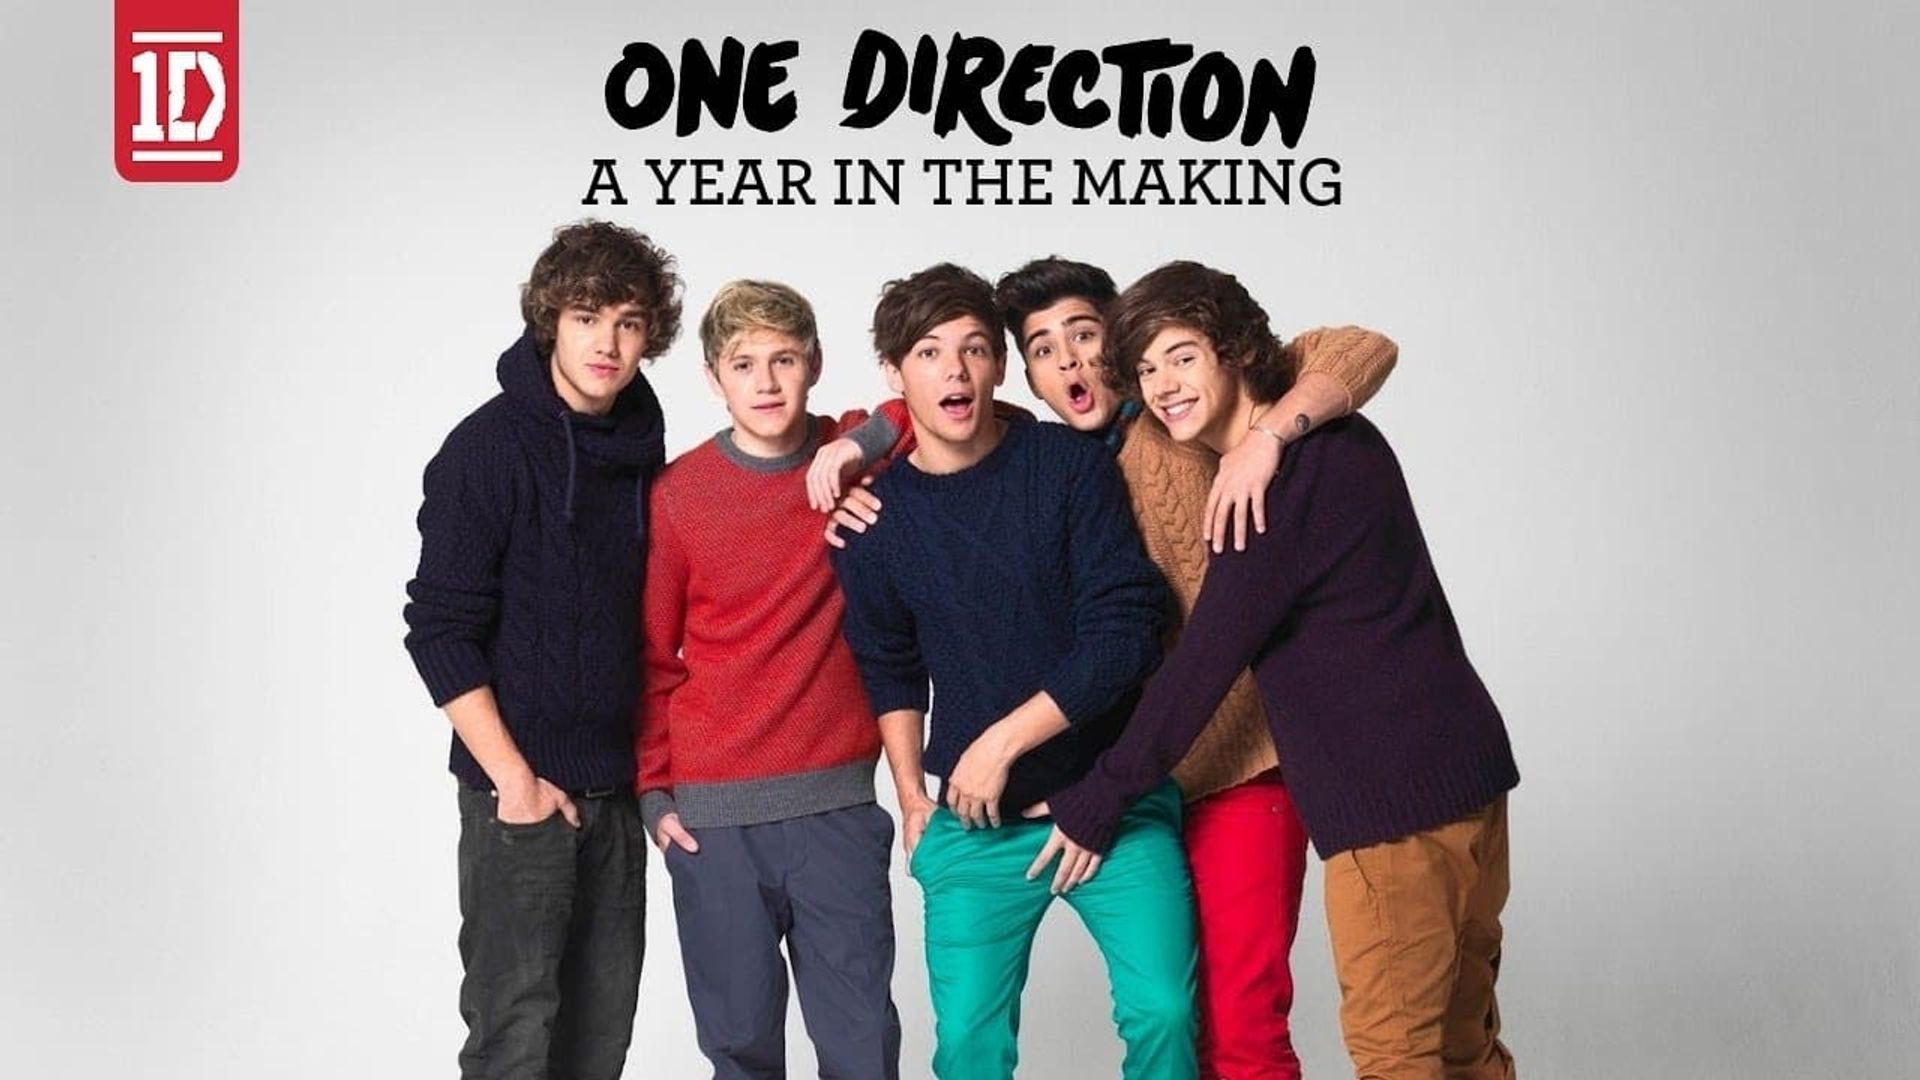 One Direction: A Year in the Making background